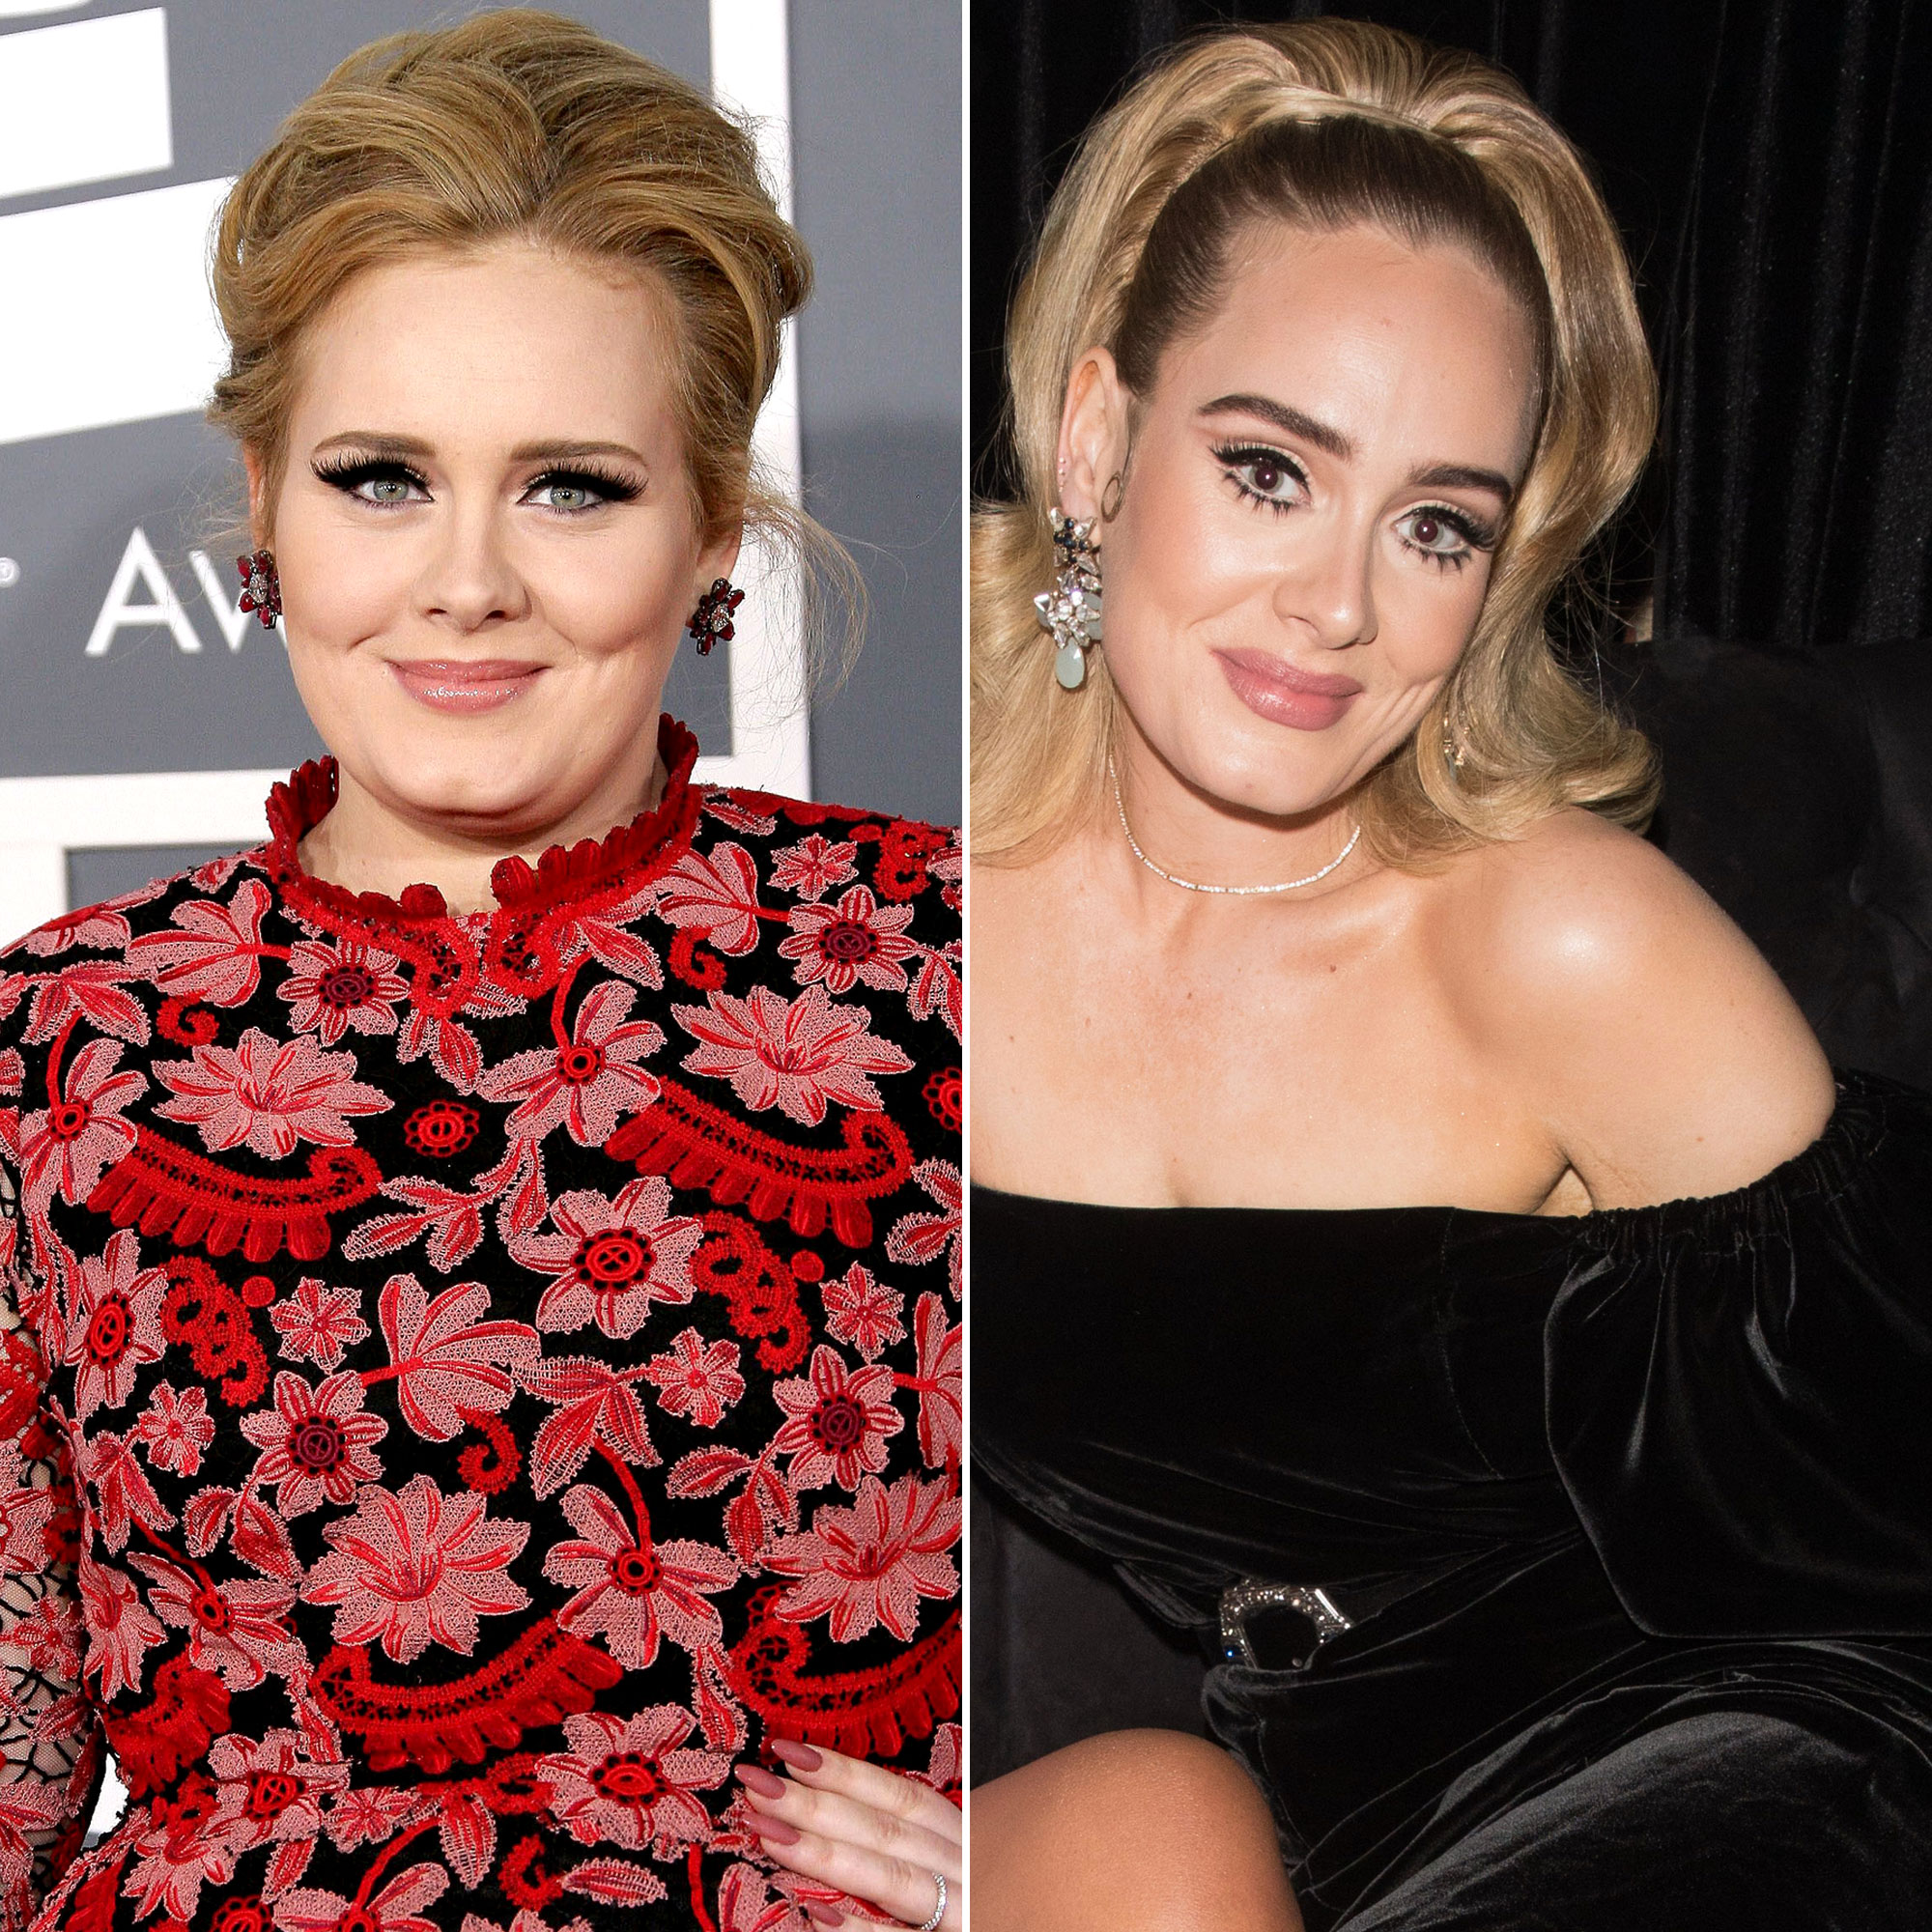 Adele Told Fan Her Massive Weight Loss Was 'Around 100 Pounds